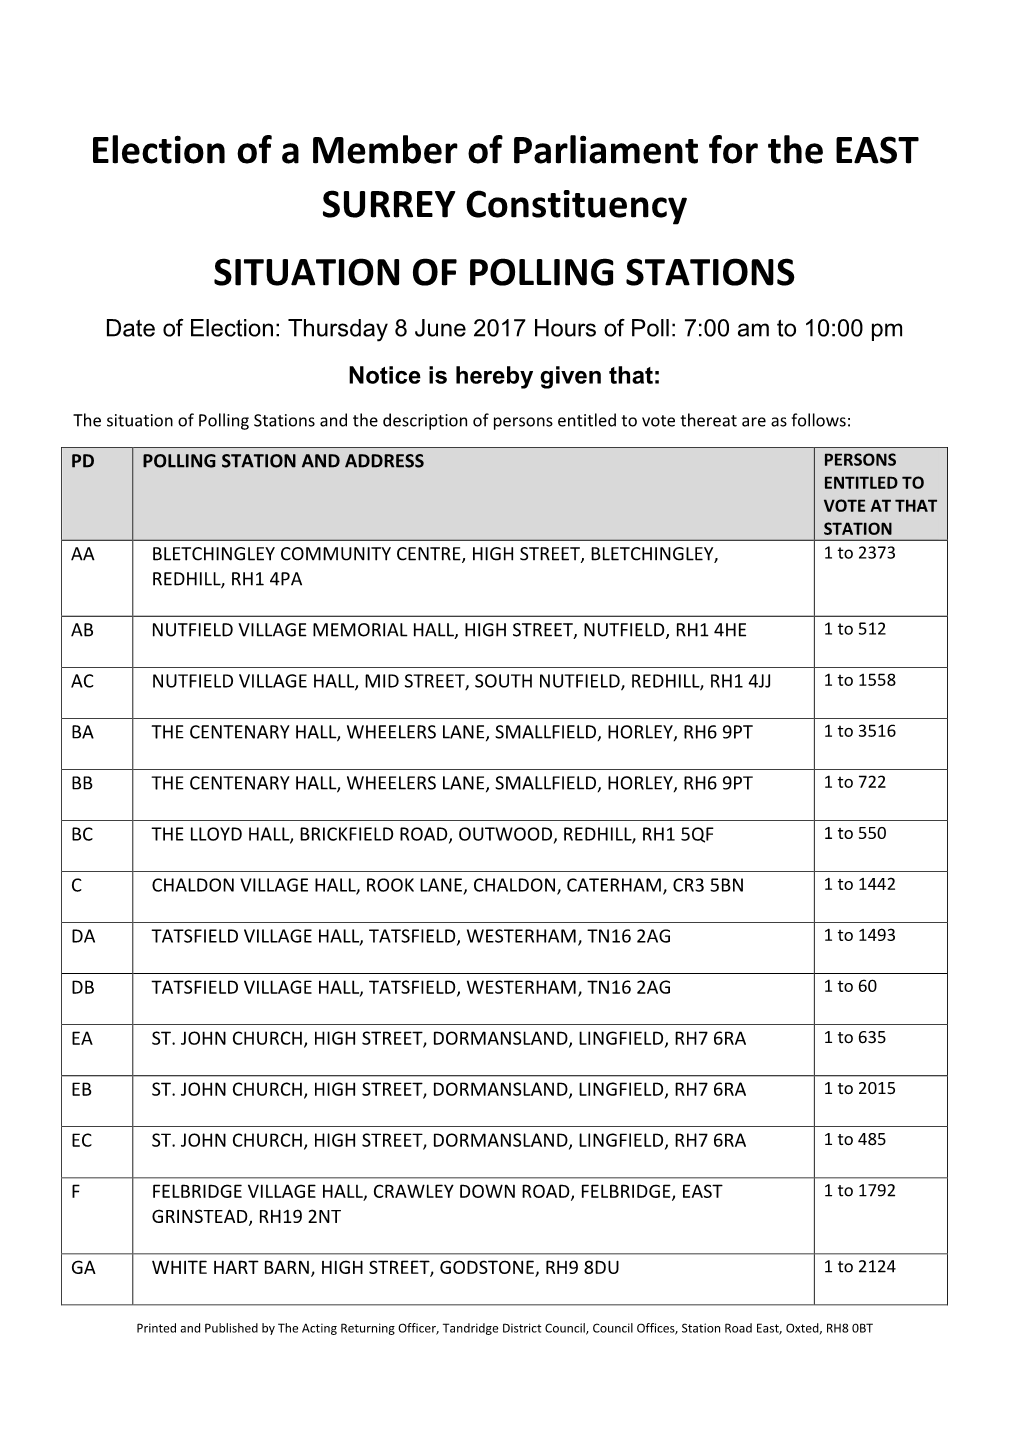 SITUATION of POLLING STATIONS Date of Election: Thursday 8 June 2017 Hours of Poll: 7:00 Am to 10:00 Pm